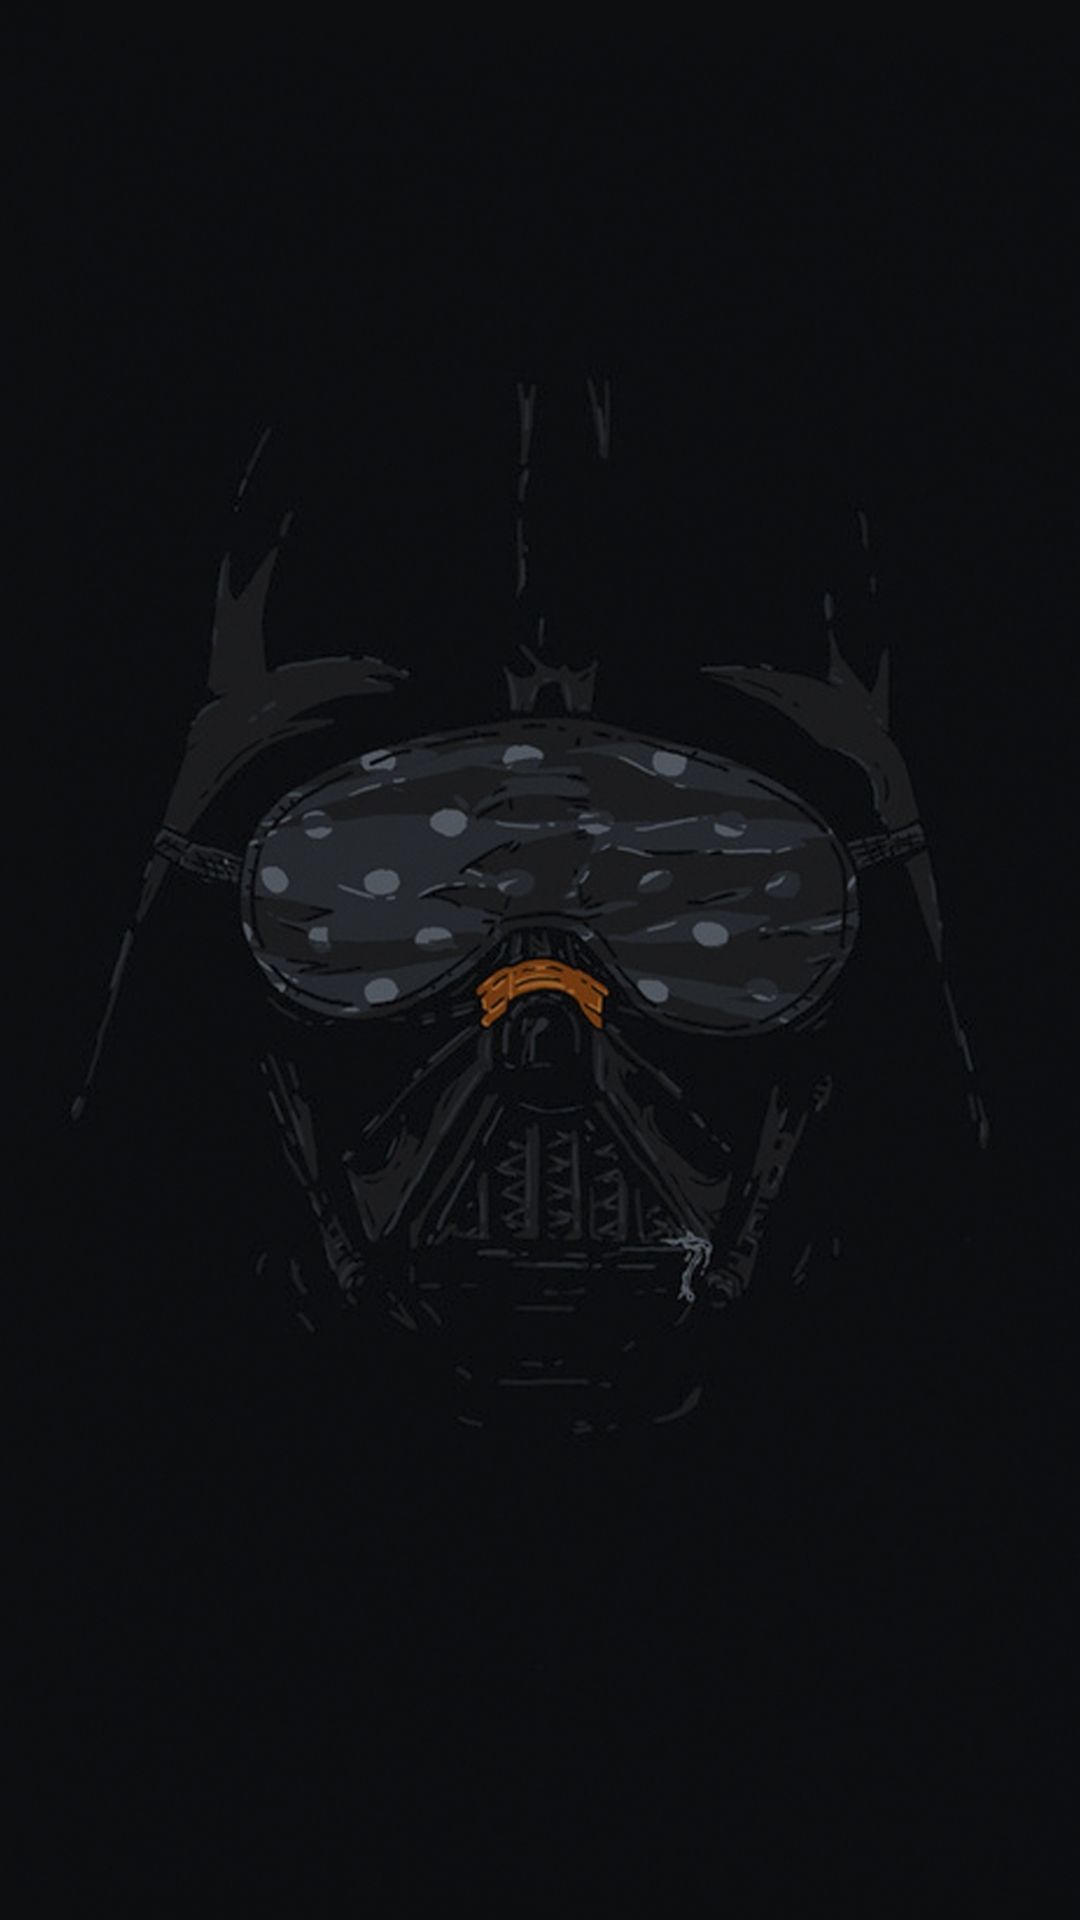 Star Wars iOS Wallpapers on